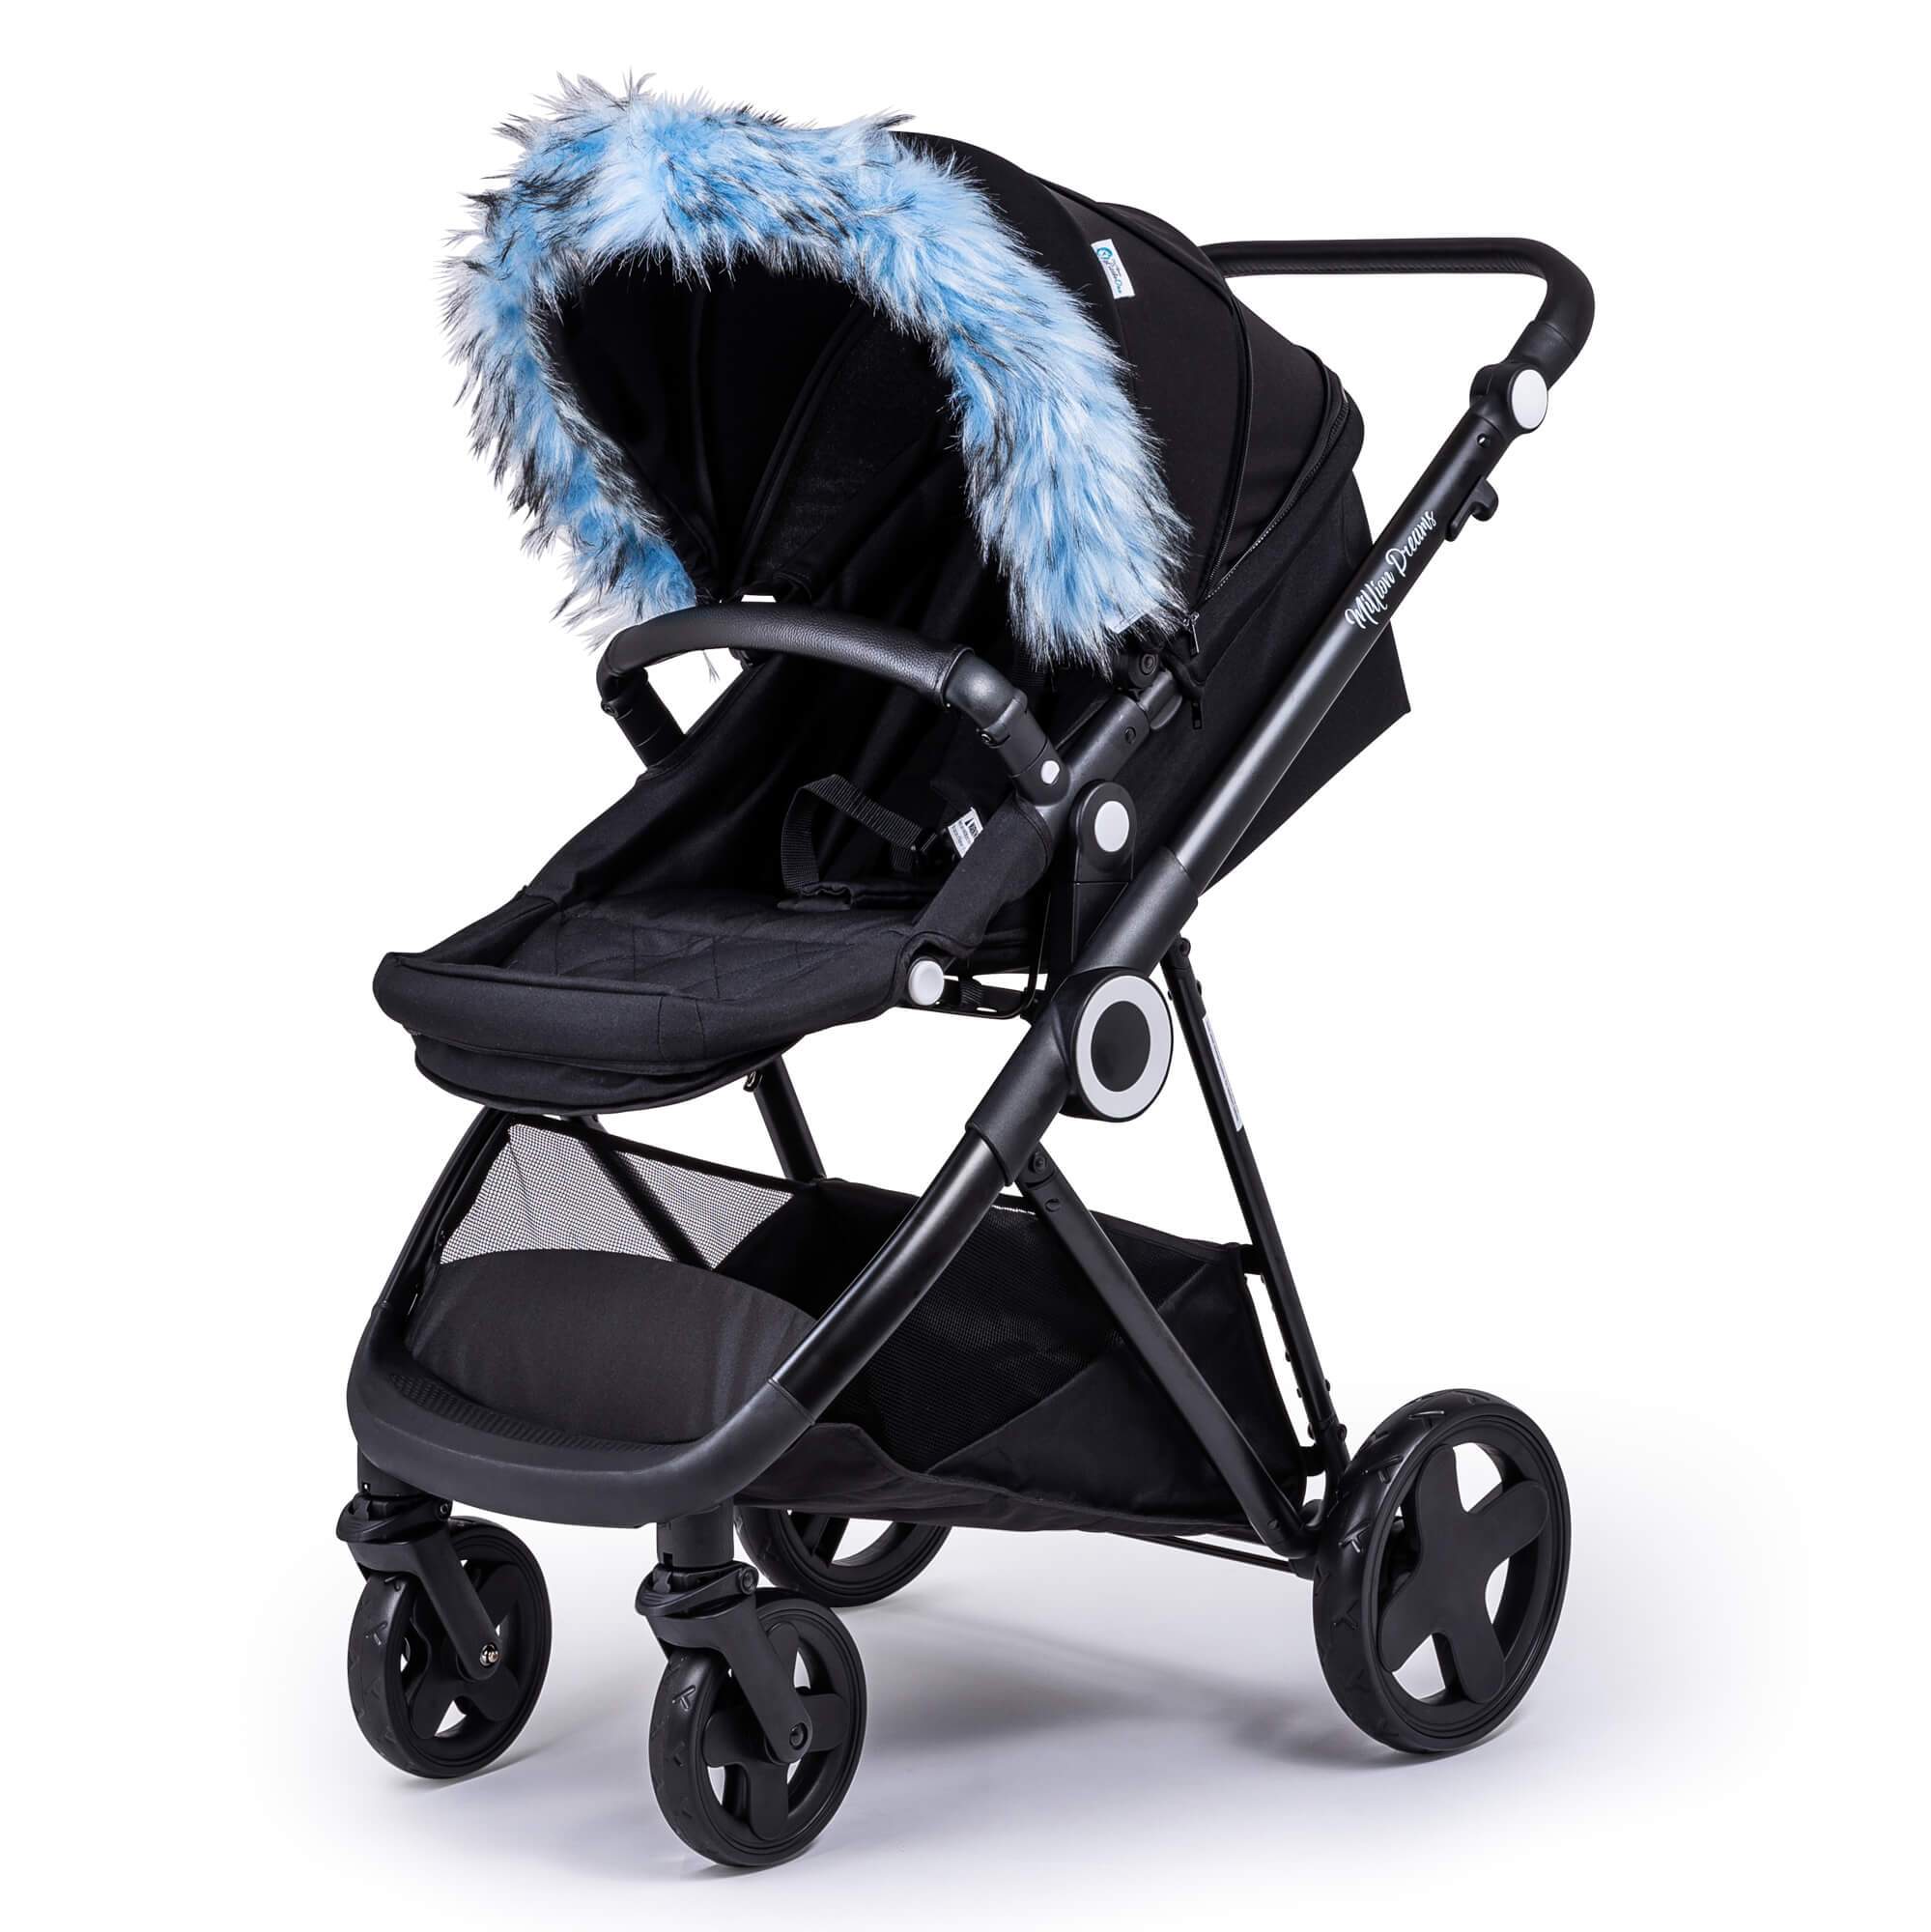 Pram Fur Hood Trim Attachment for Pushchair Compatible with Bebe 9 - Light Blue / Fits All Models | For Your Little One